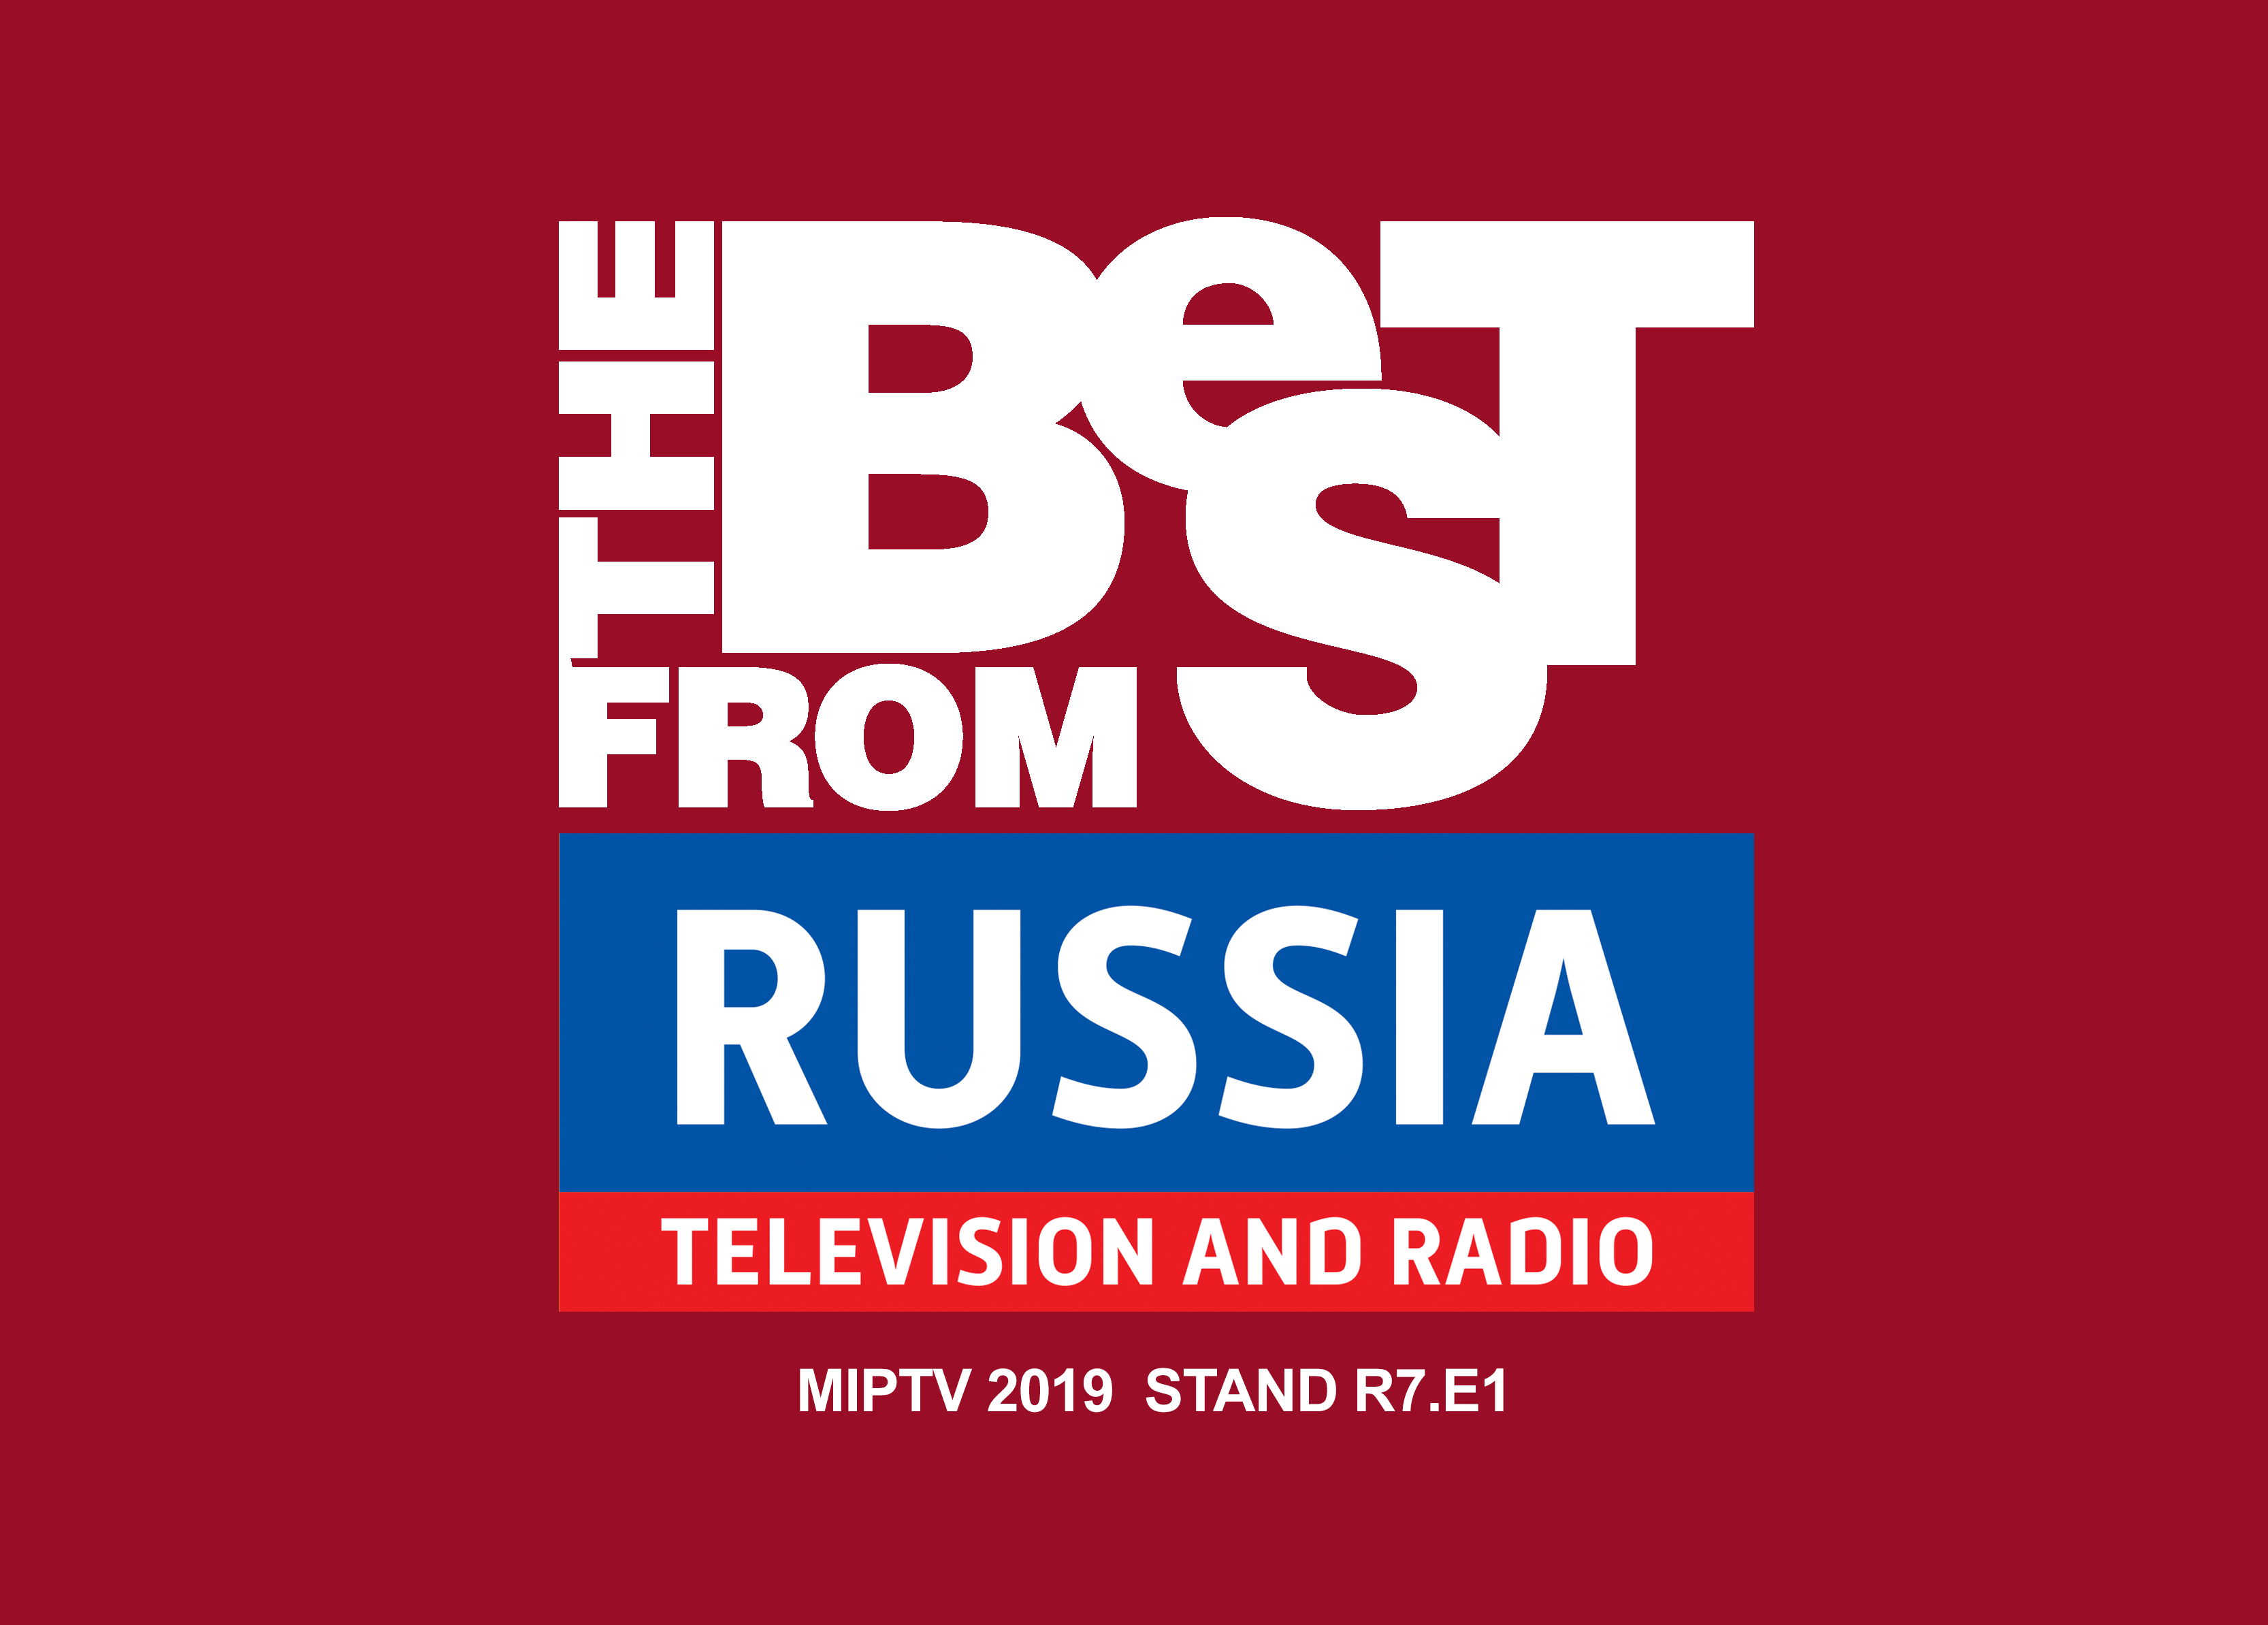 RUSSIA TELEVISION AND RADIO SIGNS INTERNATIONAL DEALS AT MIPTV 2019